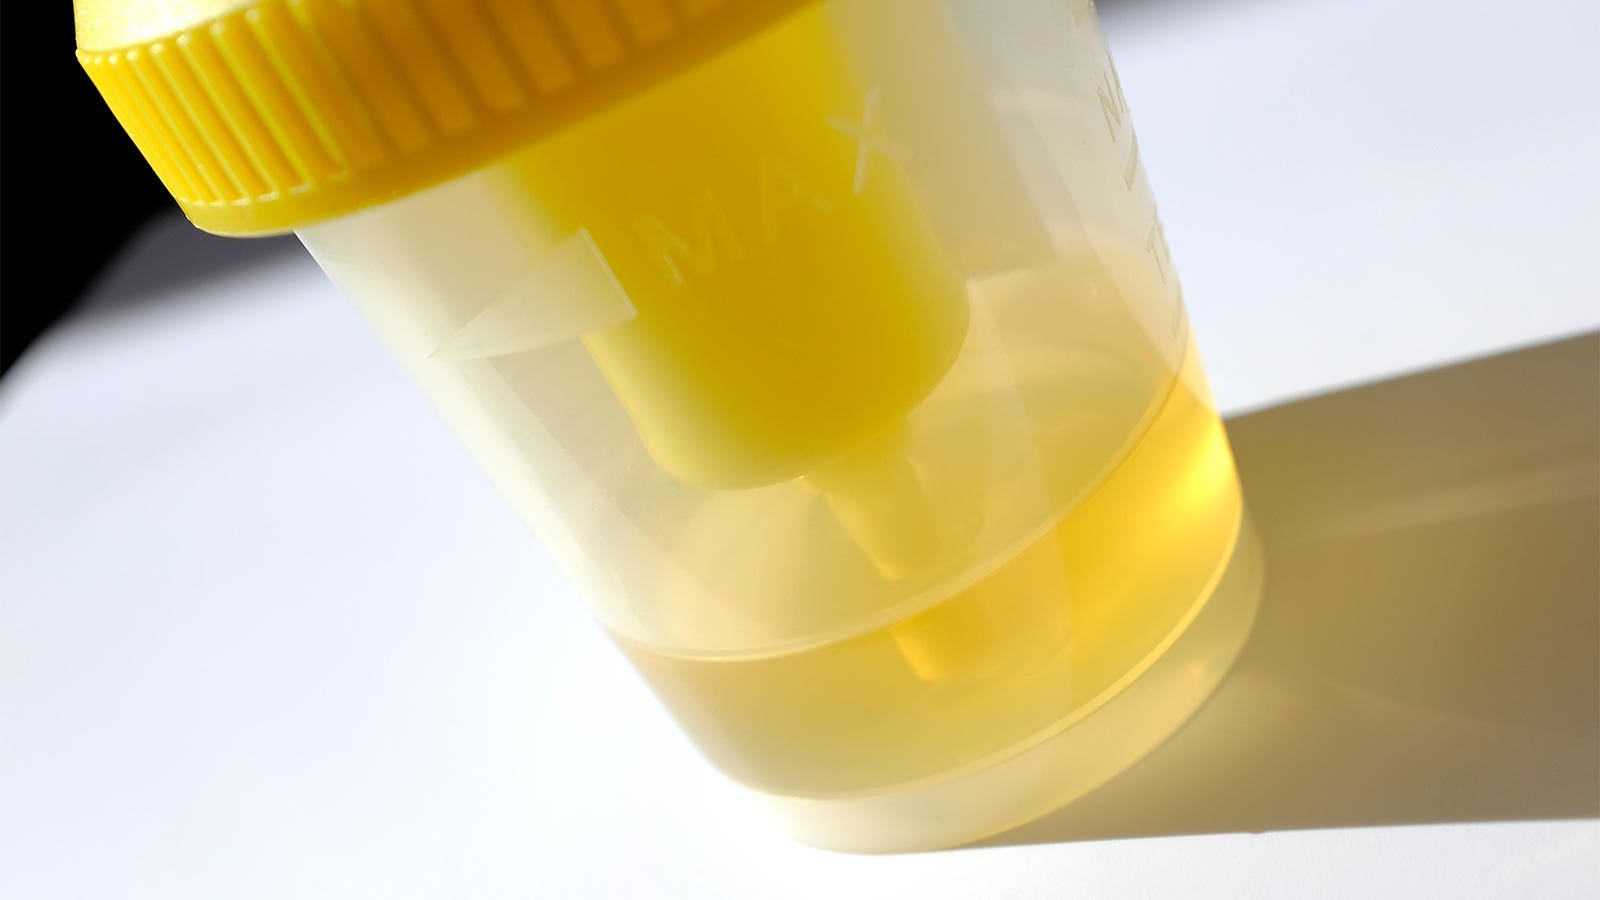 Urine Test Accurately Detected High-Grade Prostate Cancer